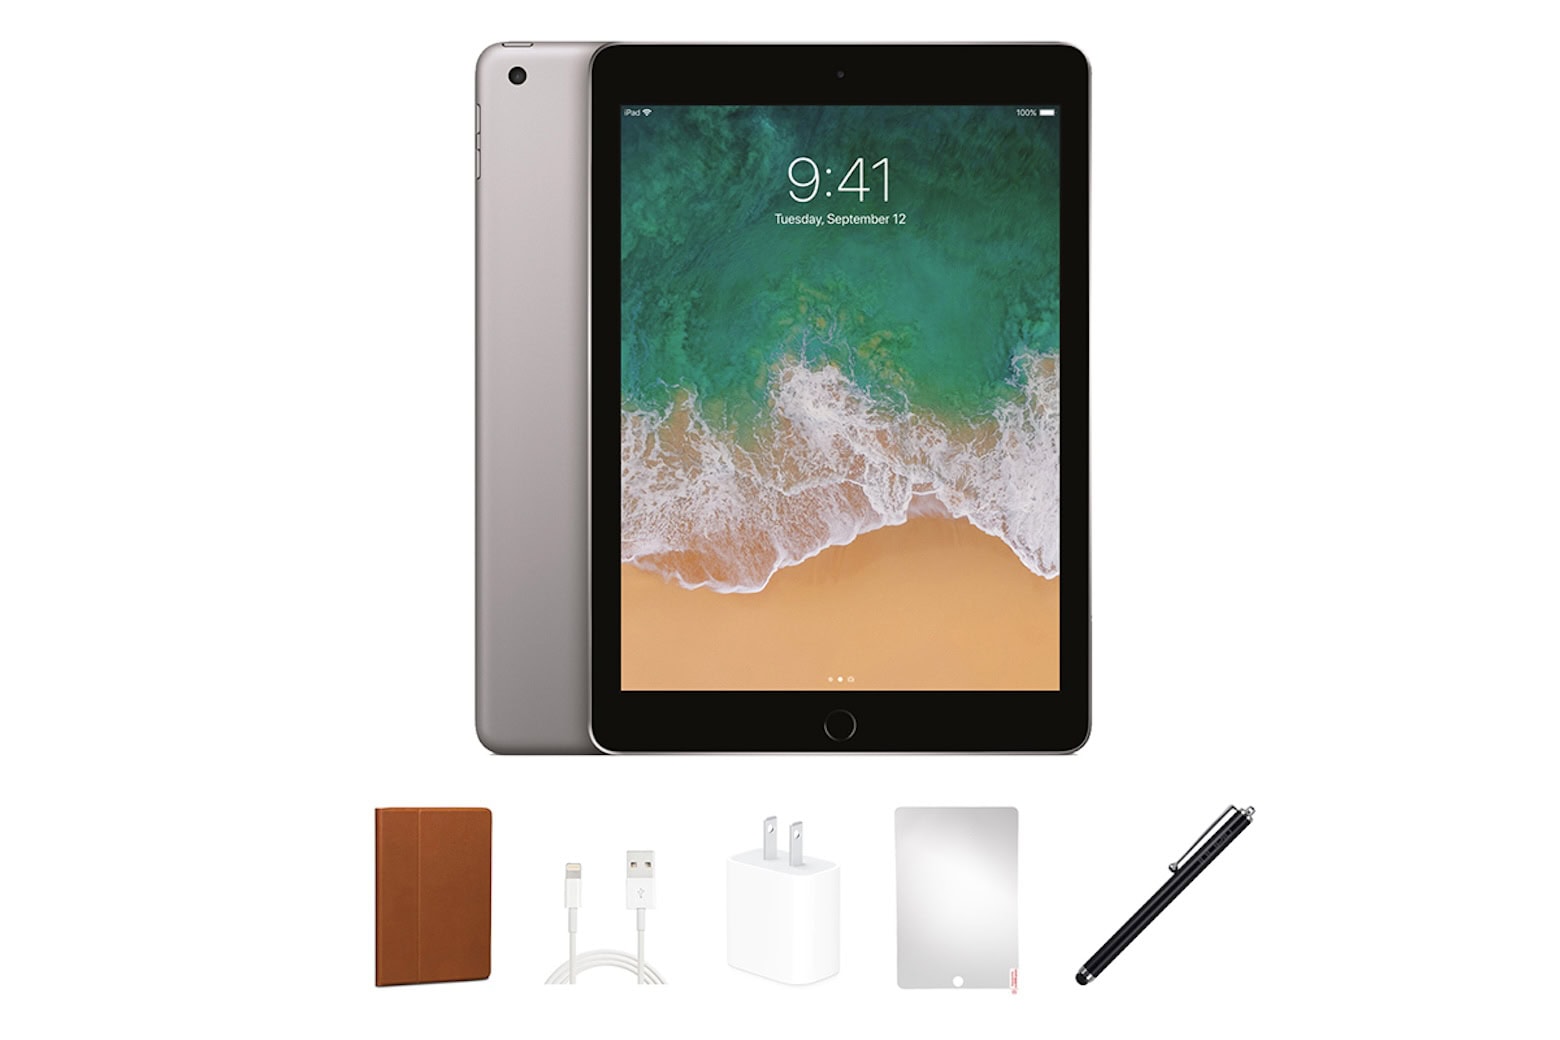 Pick up a refurbished iPad 6 with accessories for just $154.97